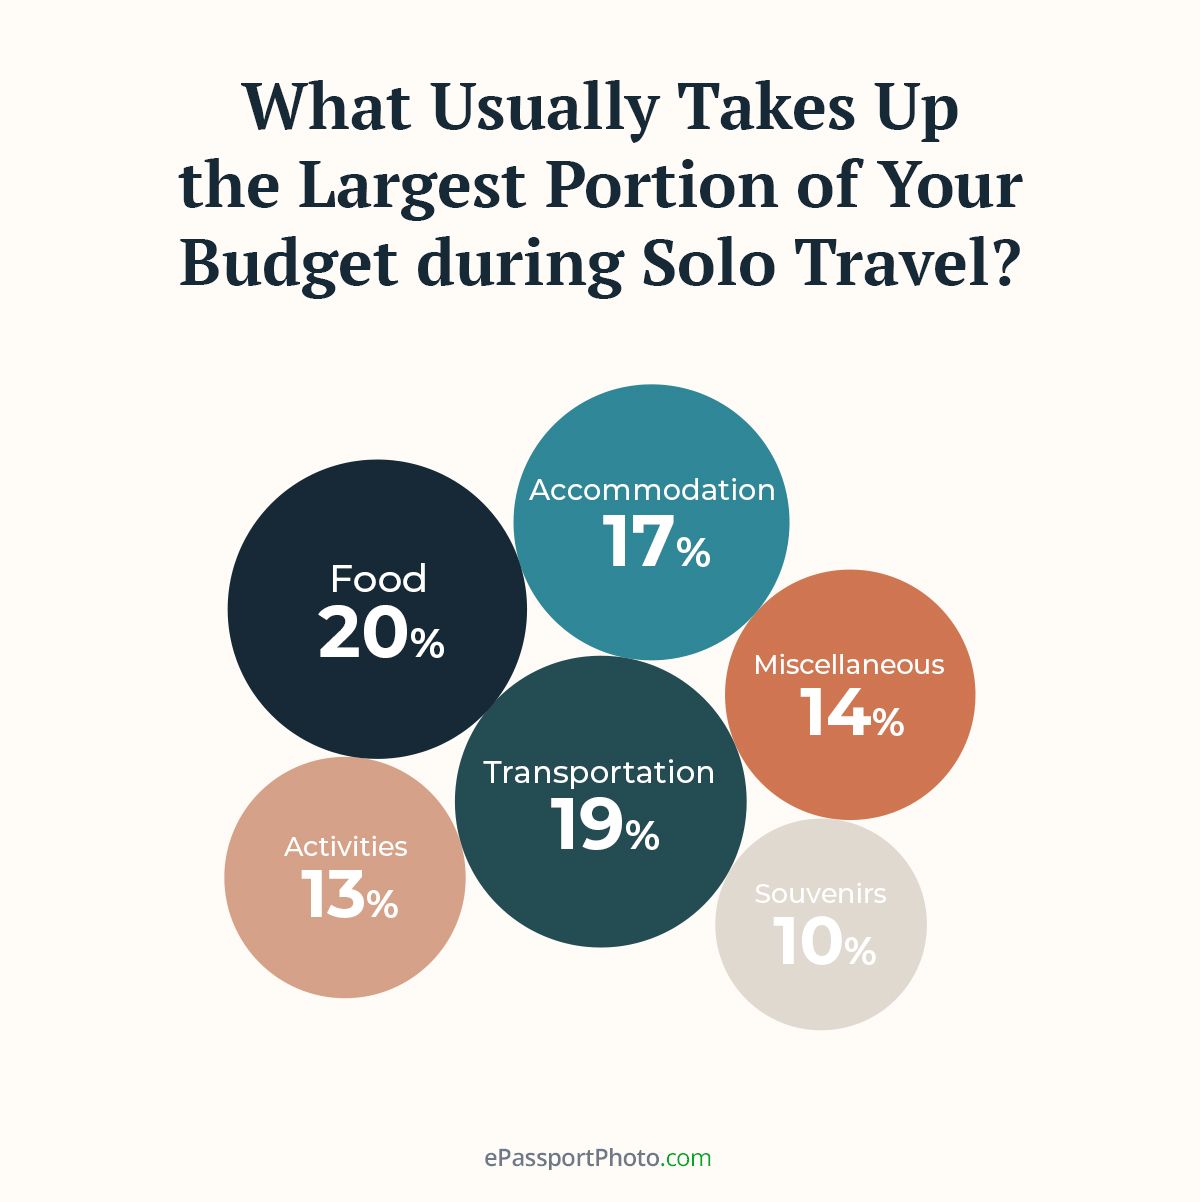 most people spend their travel budget on food (20%), transportation (19%), and accommodation (17%)